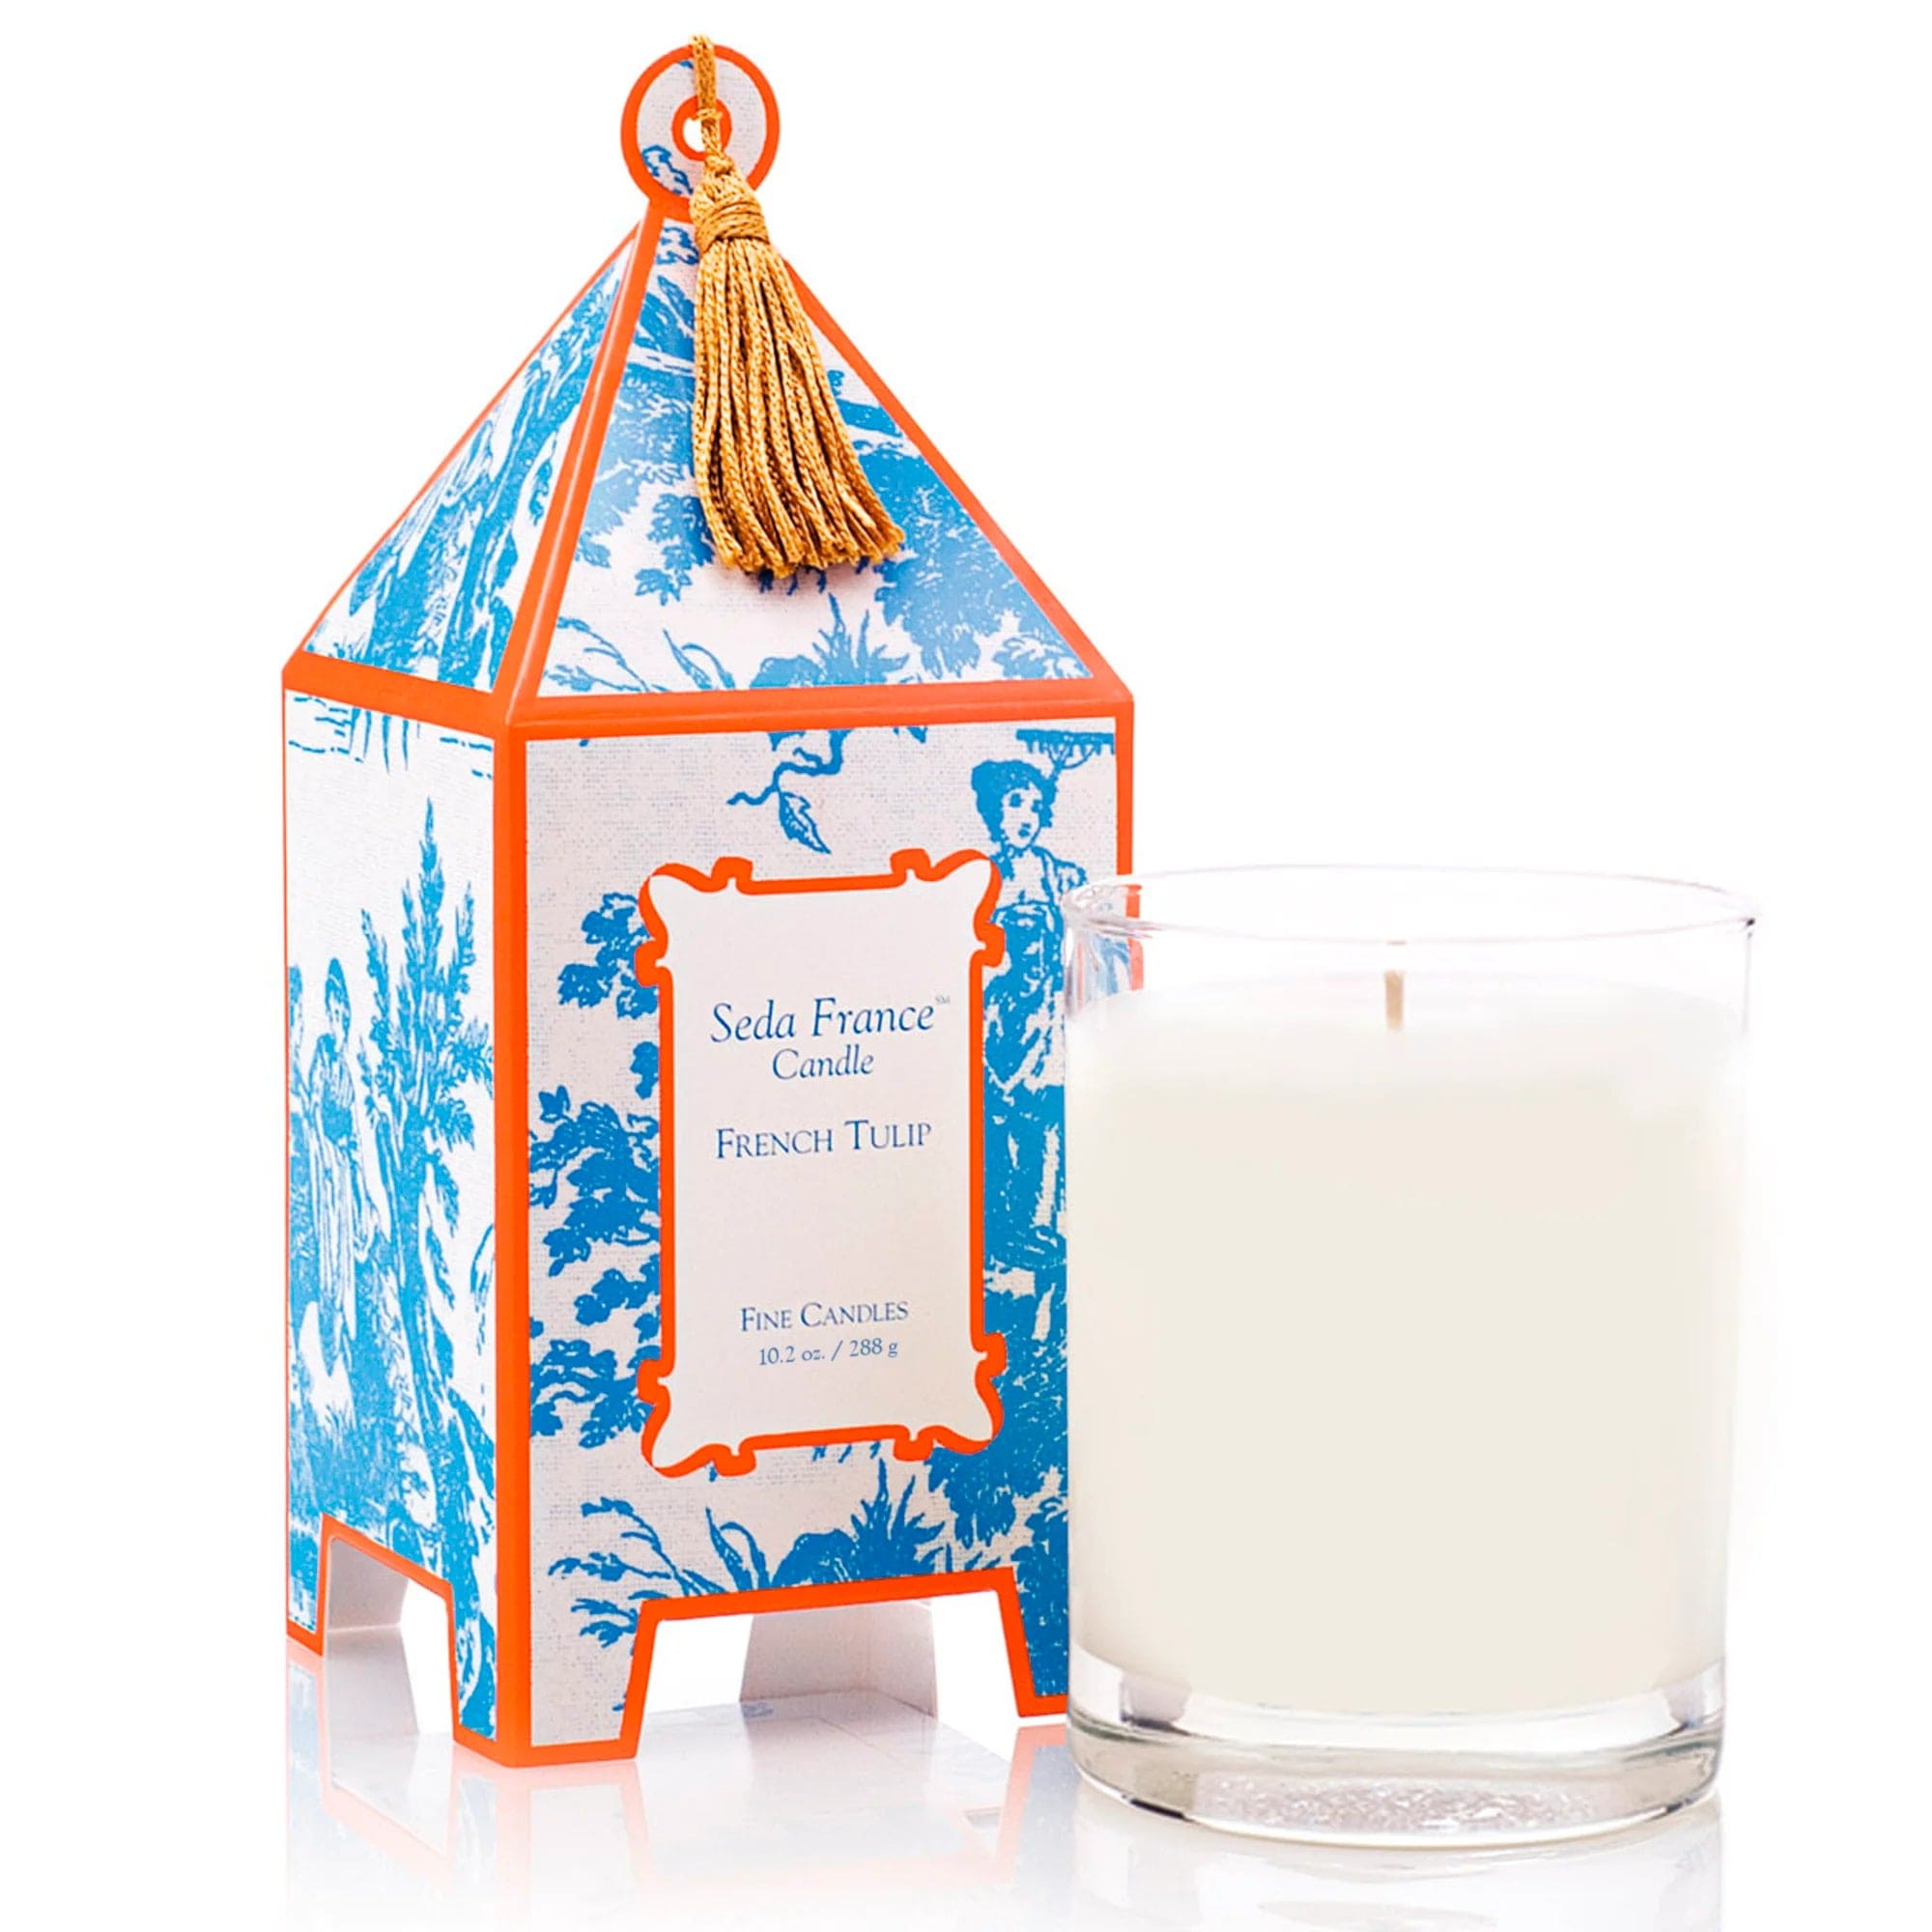 Seda France Candles Candles and Scents French Tulip Classic Toile Pagoda Box Candle